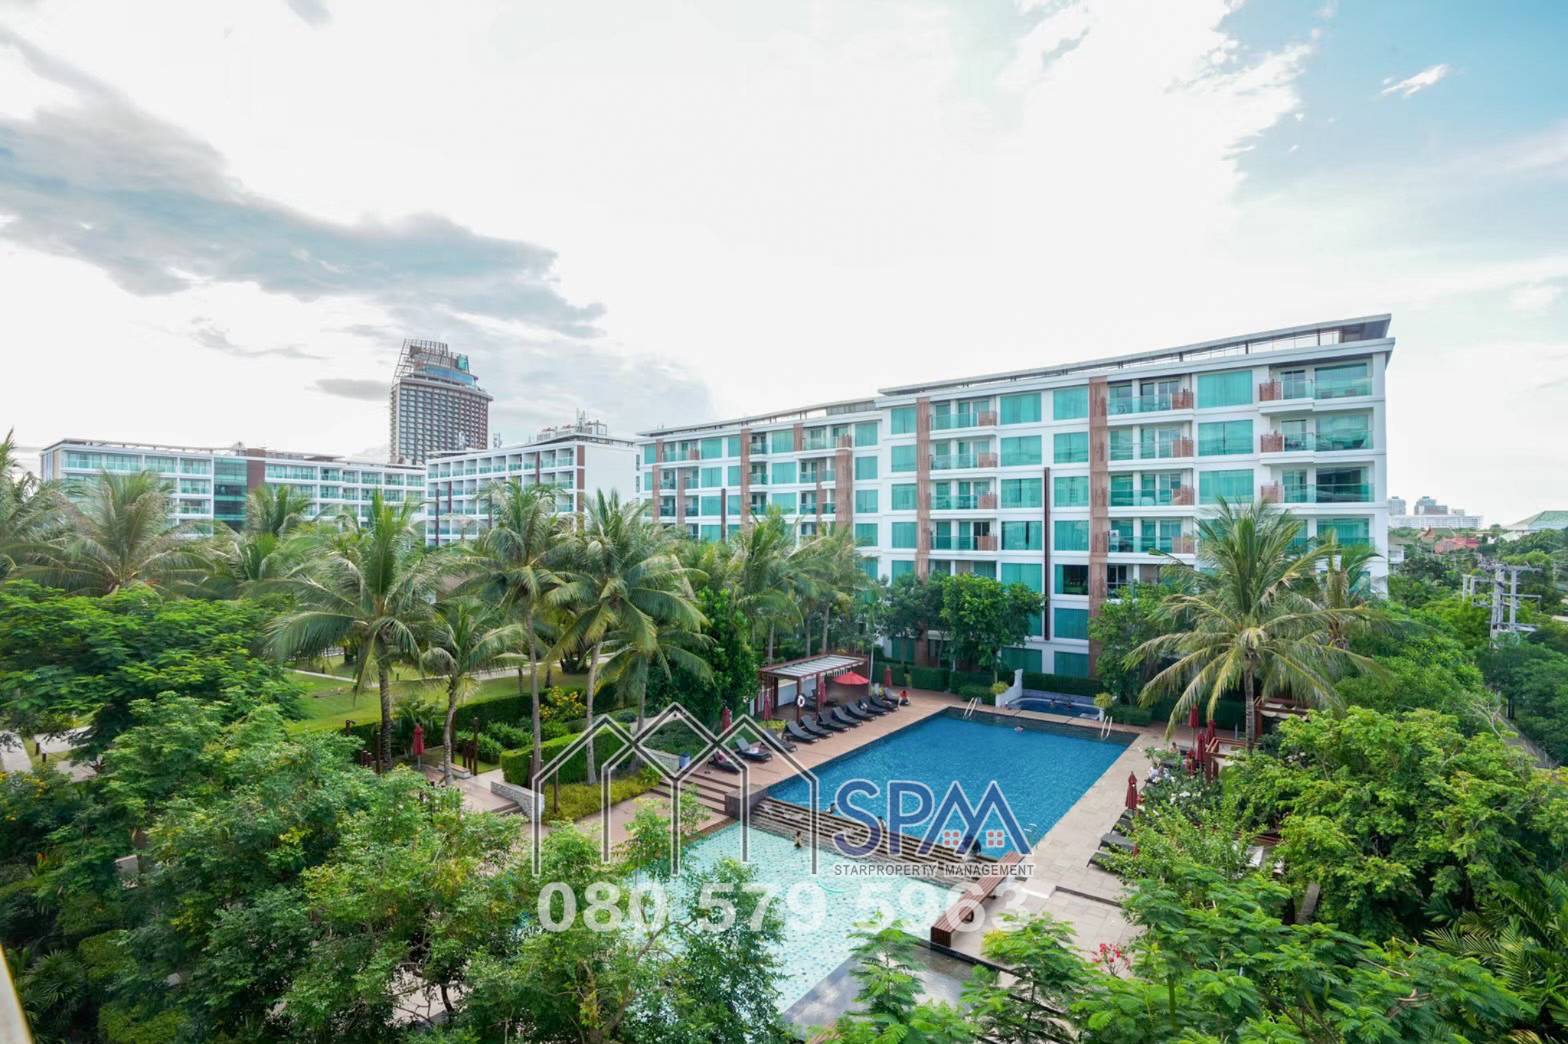 Condominium for sale at Huahin, 3 bedrooms unit at Amari Residence Huahin for sale, price 27.5 Million Baht